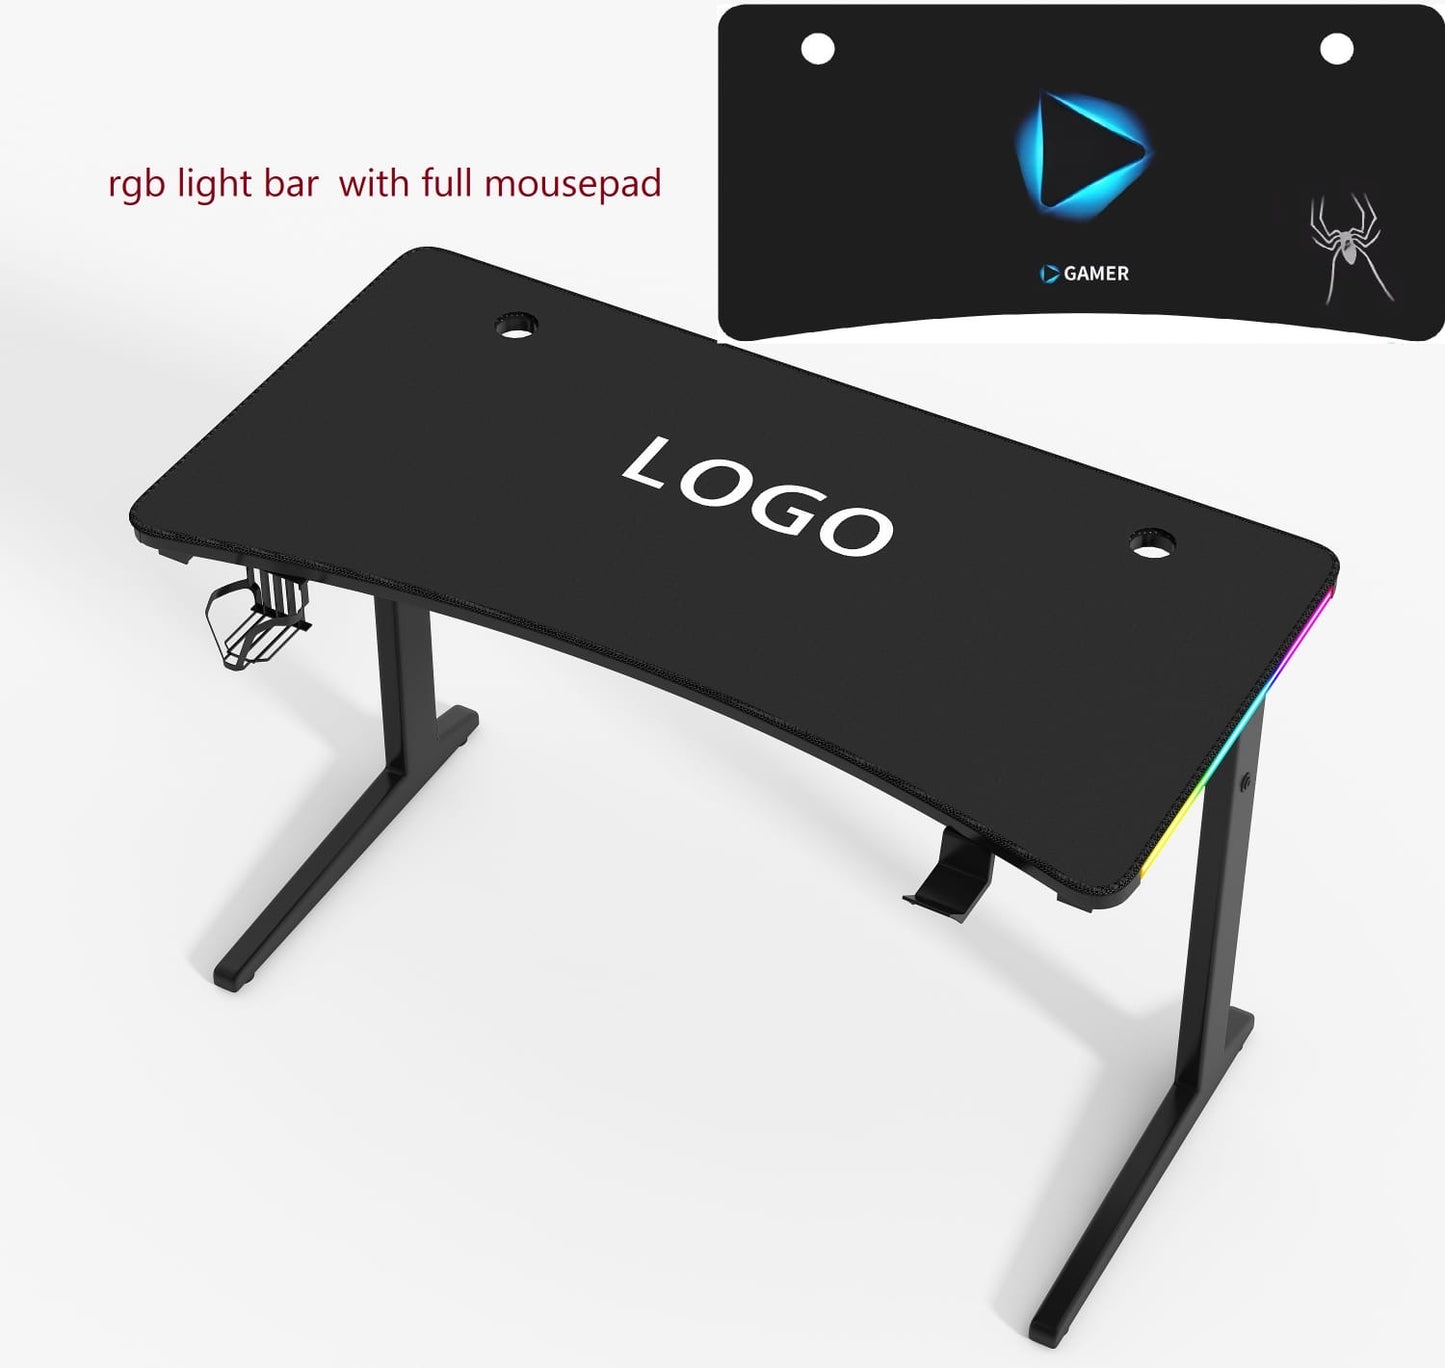 Carbon Fiber Textured Esports Gaming Table with RGB